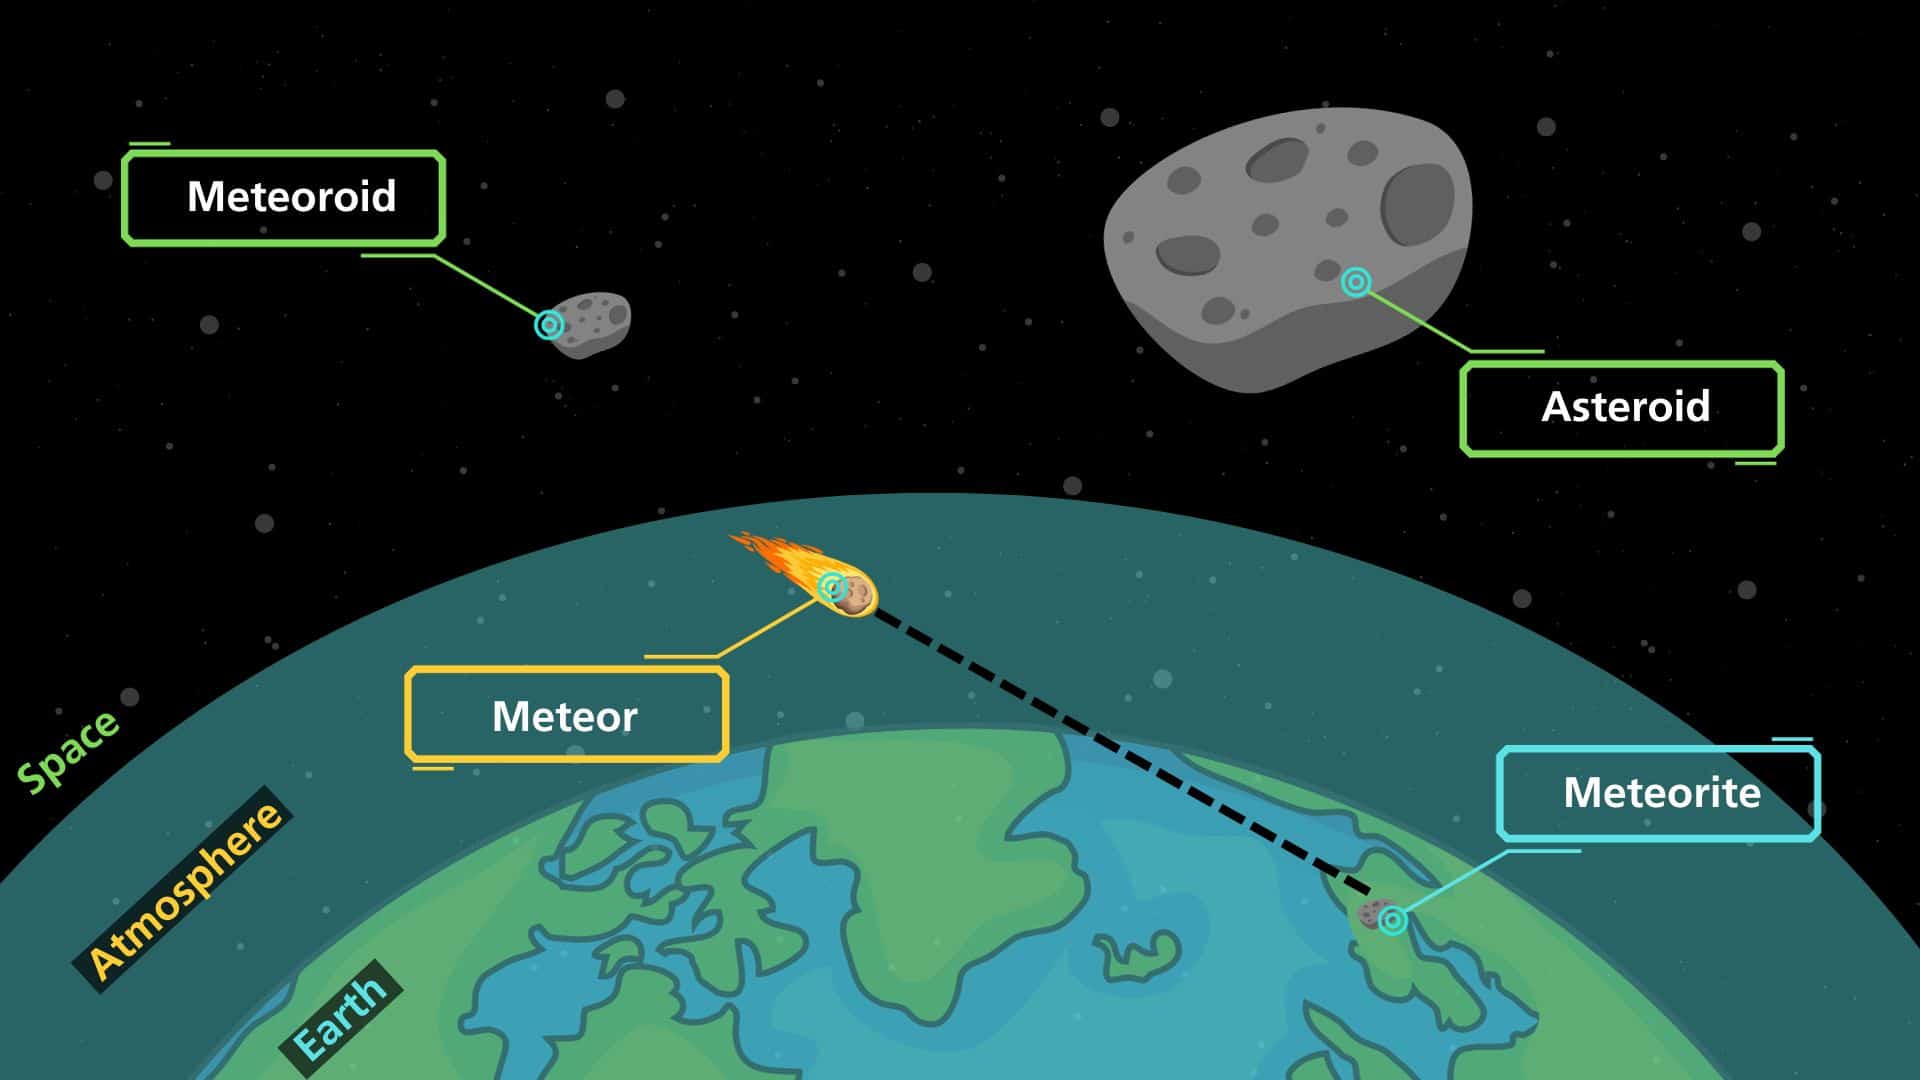 Differences among meteoroids, meteors, and meteorites